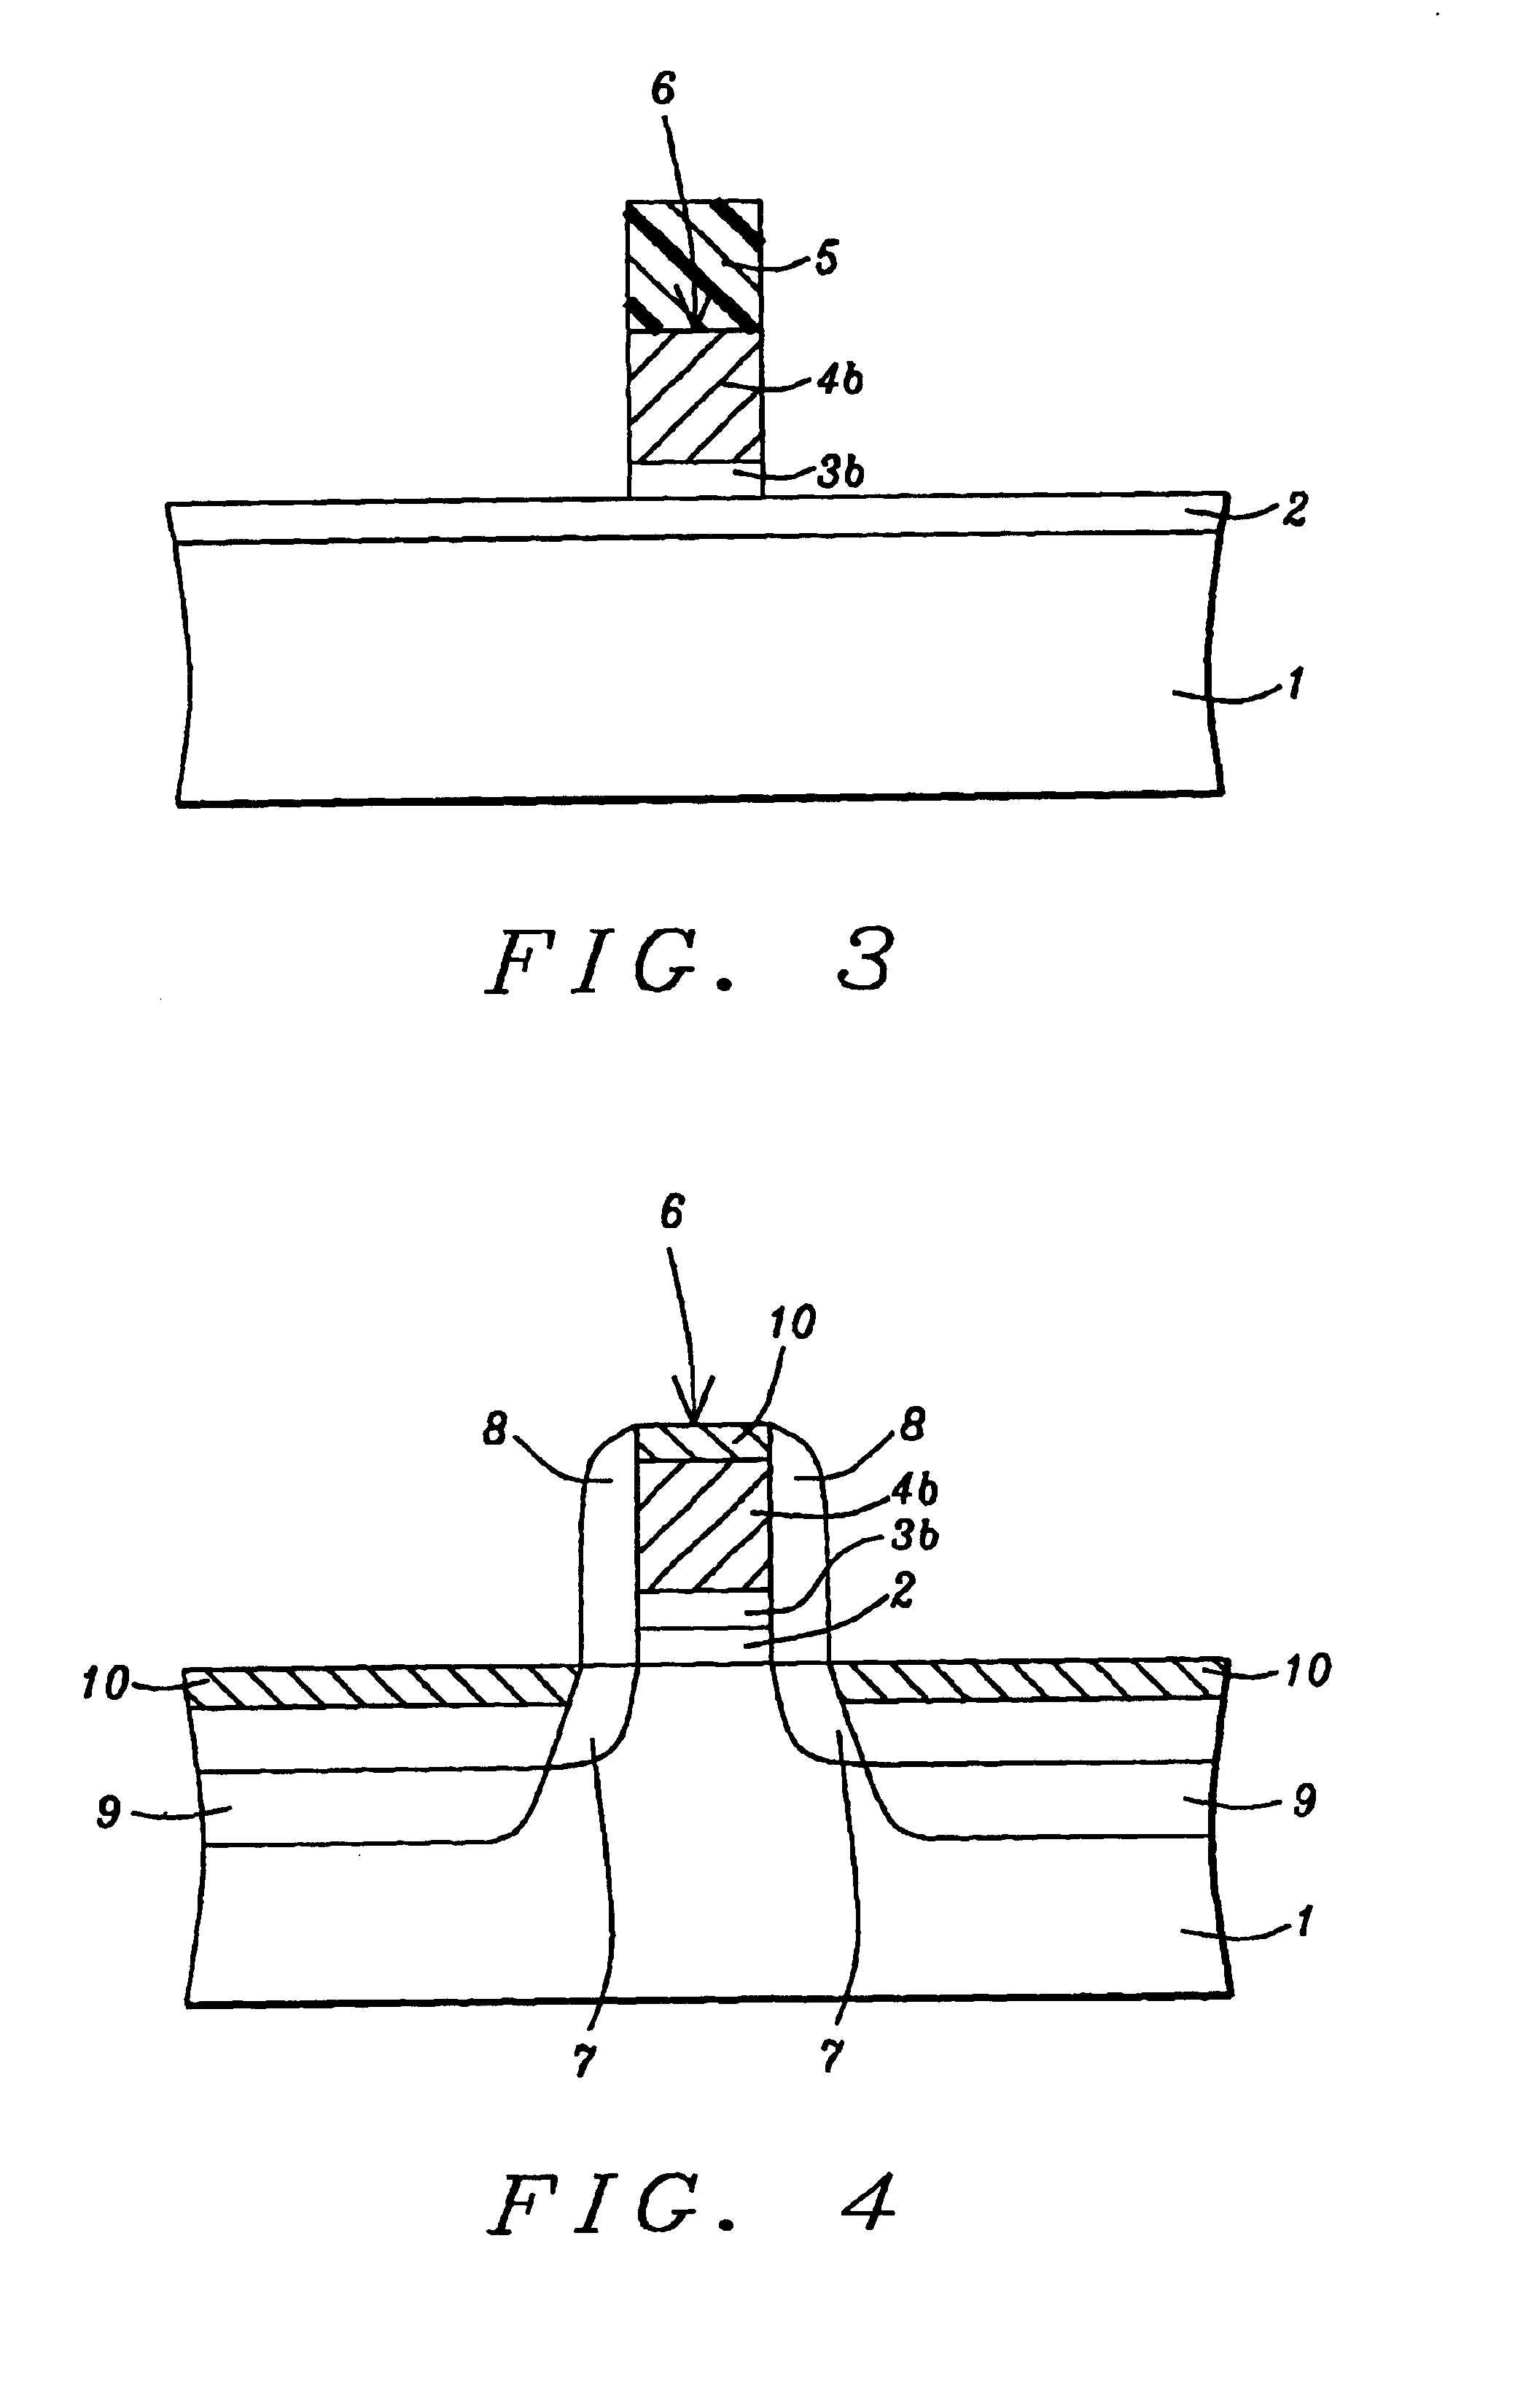 Method of fabricating a MOSFET device with metal containing gate structures